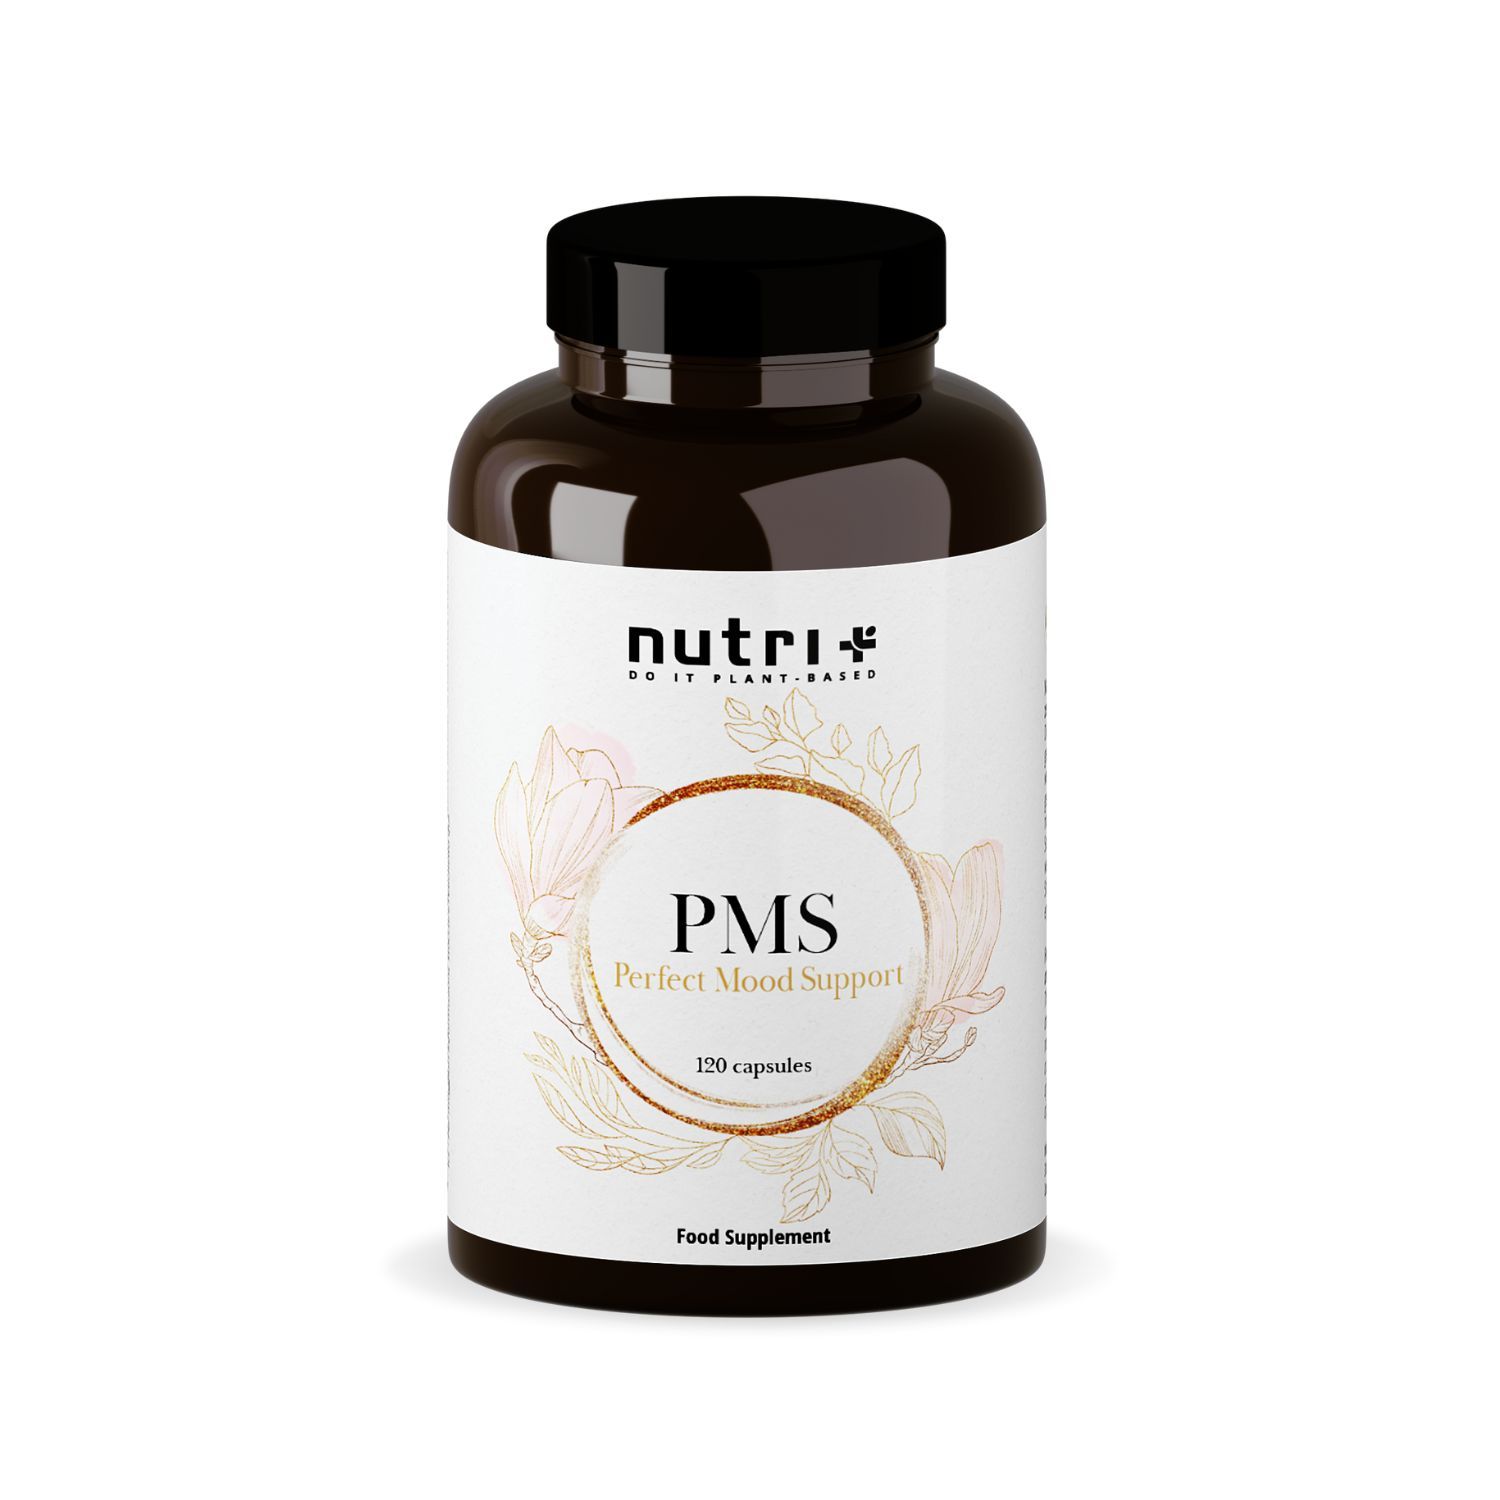 Nutri+ Perfect Mood Support PMS